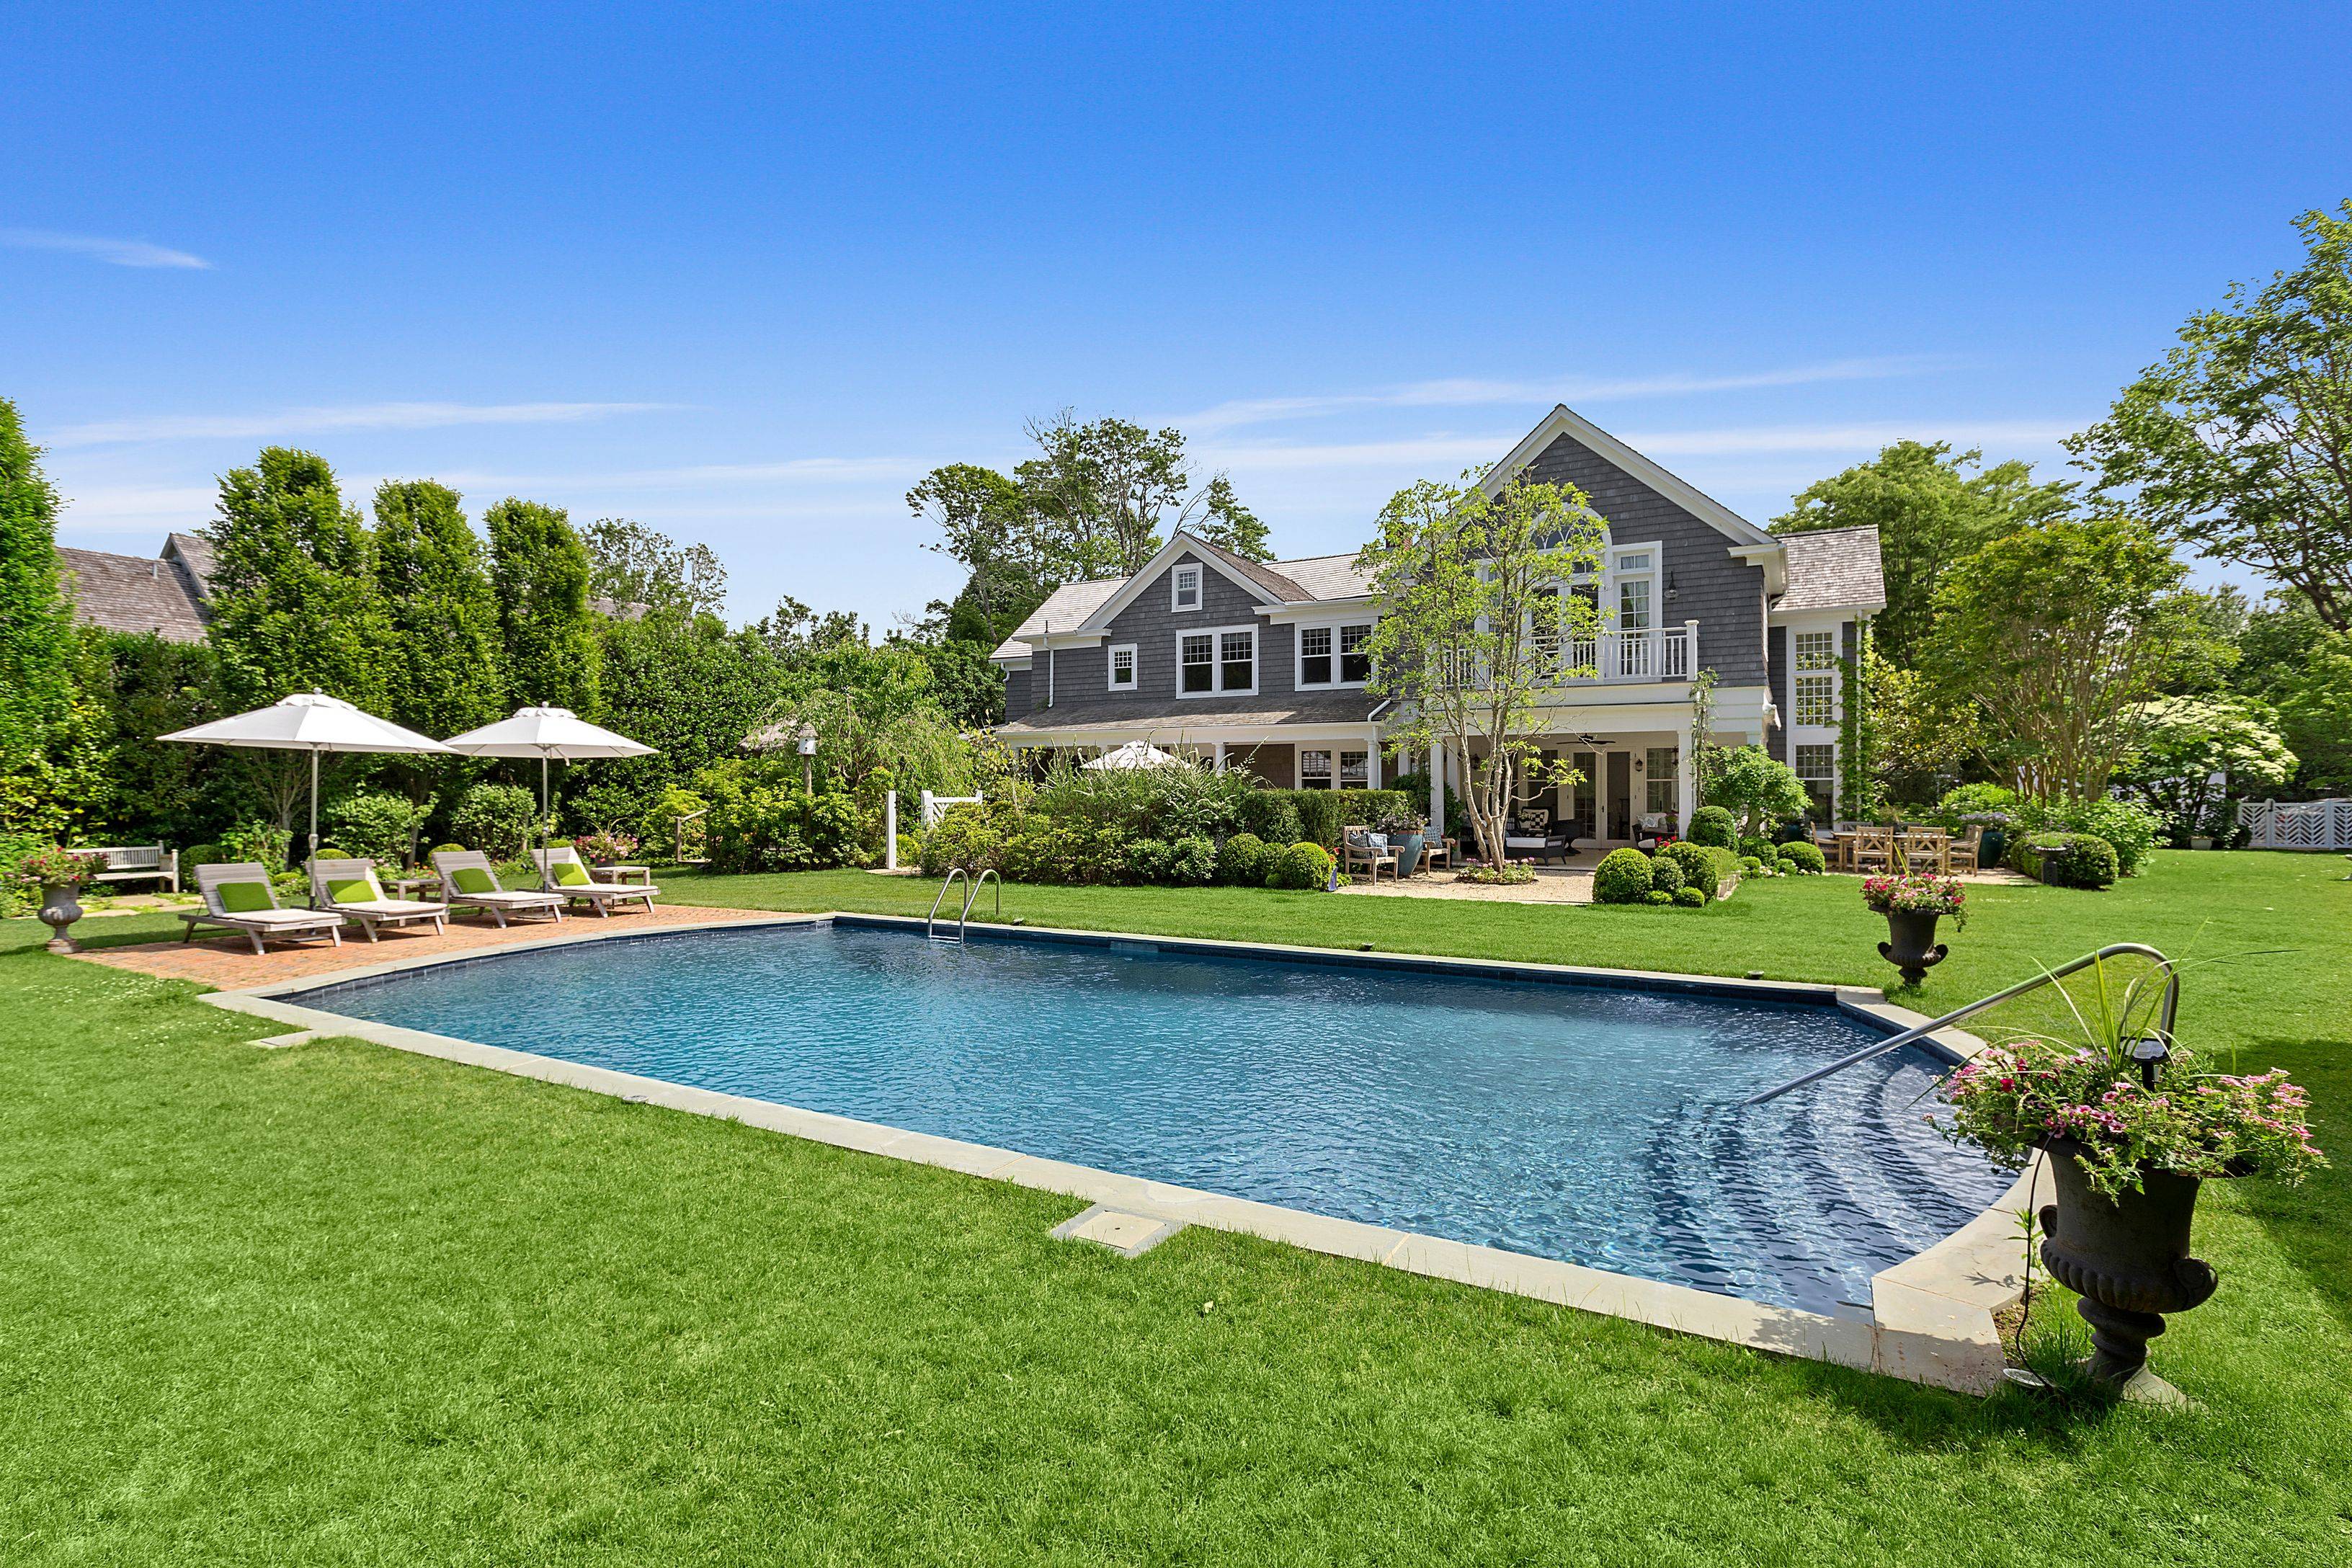 East Hampton Village Traditional 7 Bed/ 7.5 Bath - Close to All